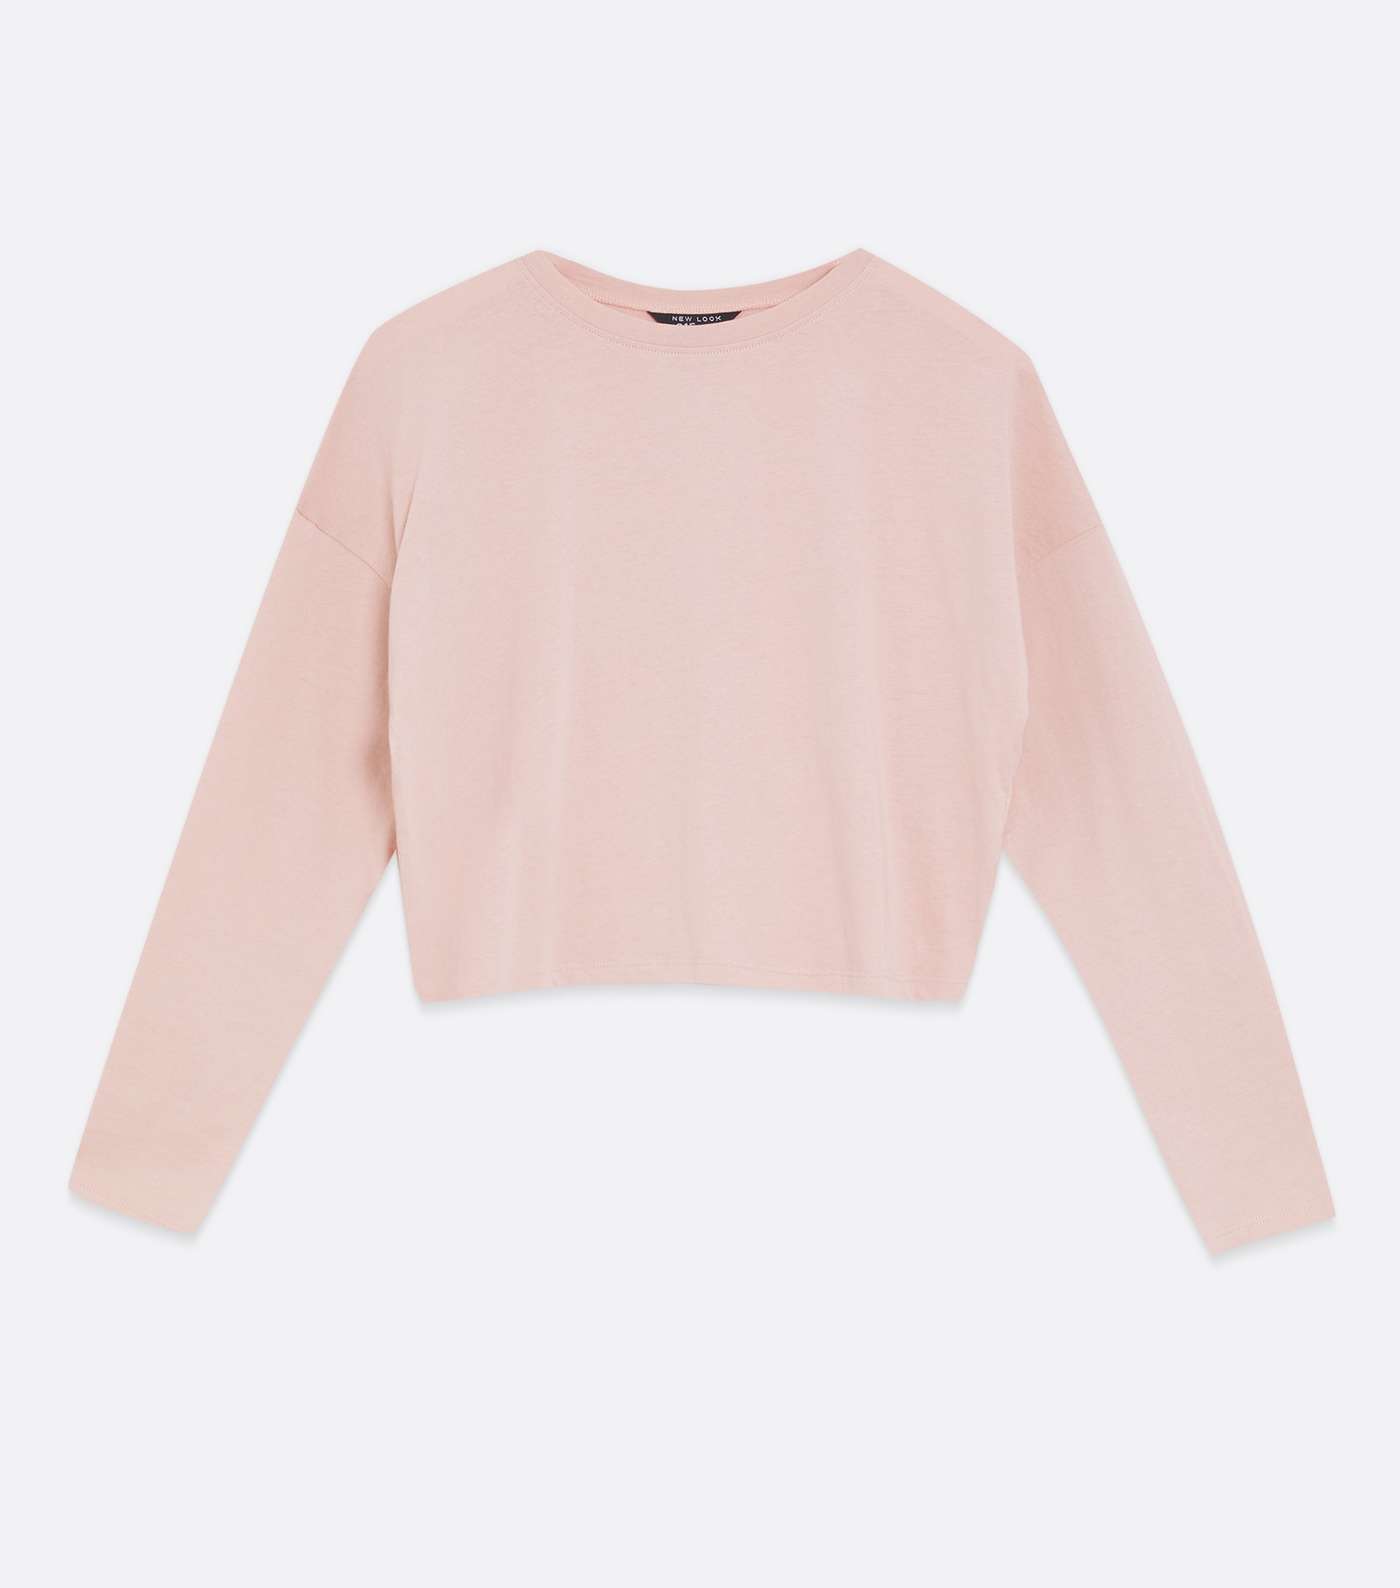 Girls Pale Pink Boxy Fit Crew Long Sleeve Top Image 5